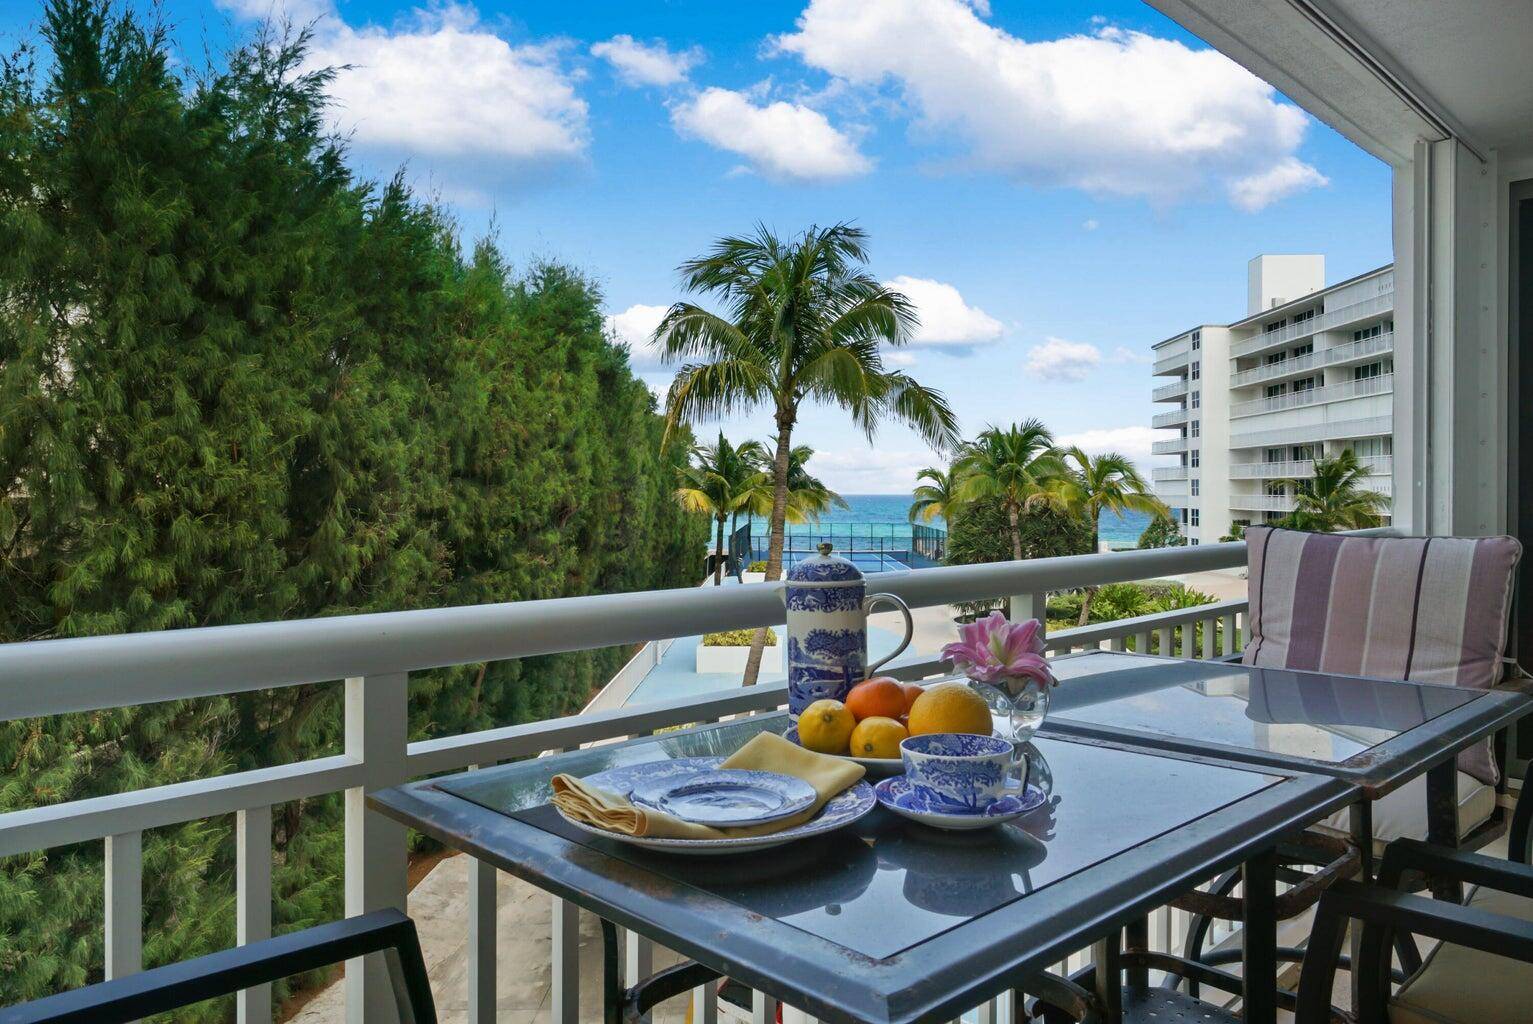 This gorgeous 2 bed 2 bath corner unit features an expansive balcony with views of the ocean and tennis court.